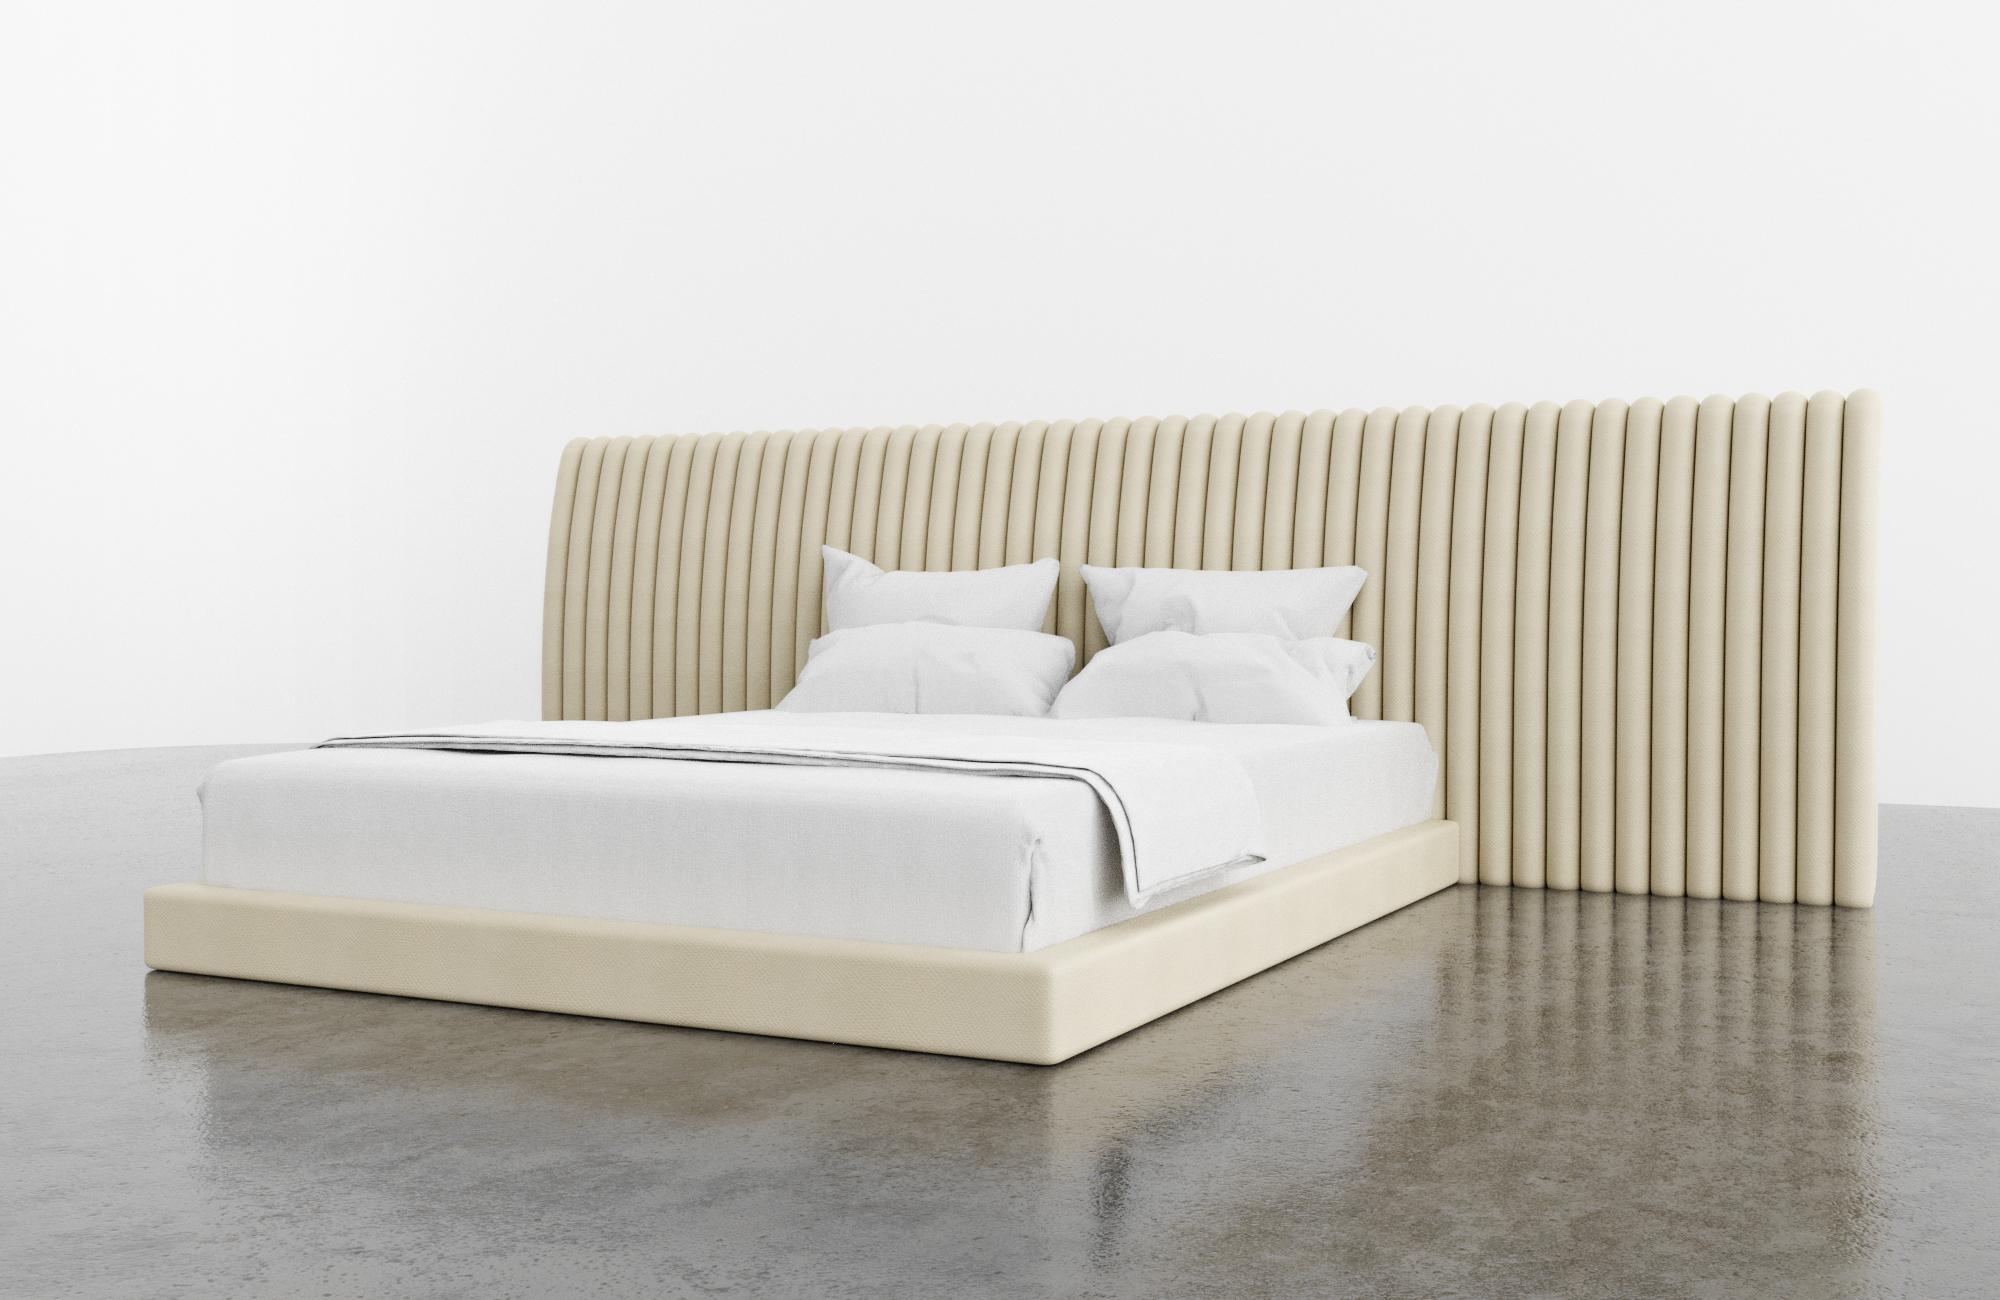 The Channel bed features a modern channeled upholstered headboard and matching upholstered frame. Available in King, Cali King, Queen or Twin sizes. Fully custom and made to order in California. As shown in Queen Size in Kimodo faux leather/cream